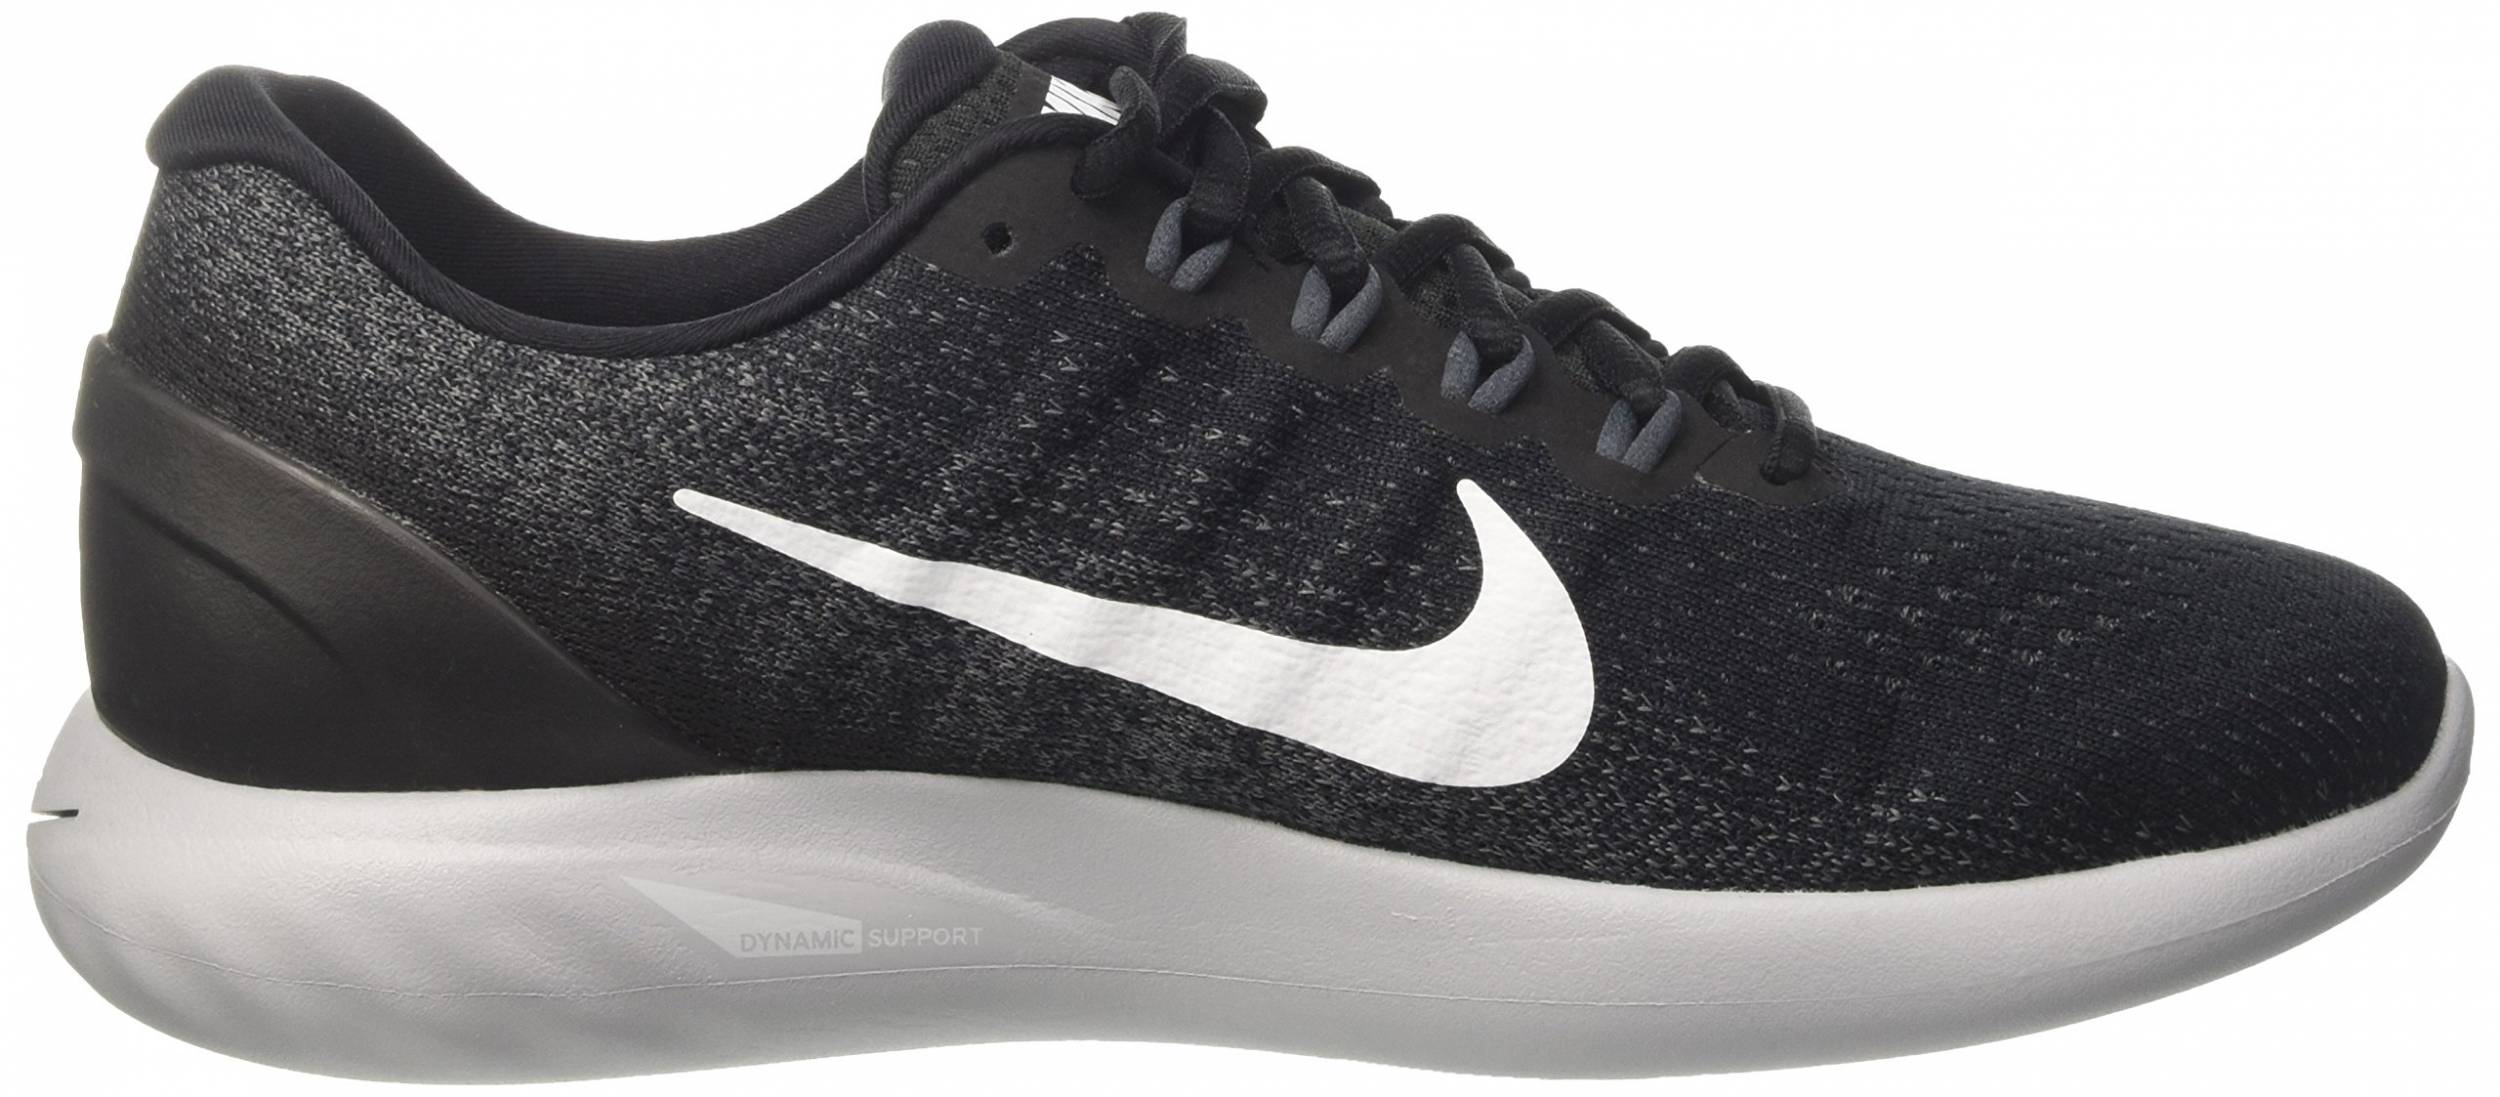 honor Excremento Asombro Nike LunarGlide 9 Review 2023, Facts, Deals (£61) | RunRepeat